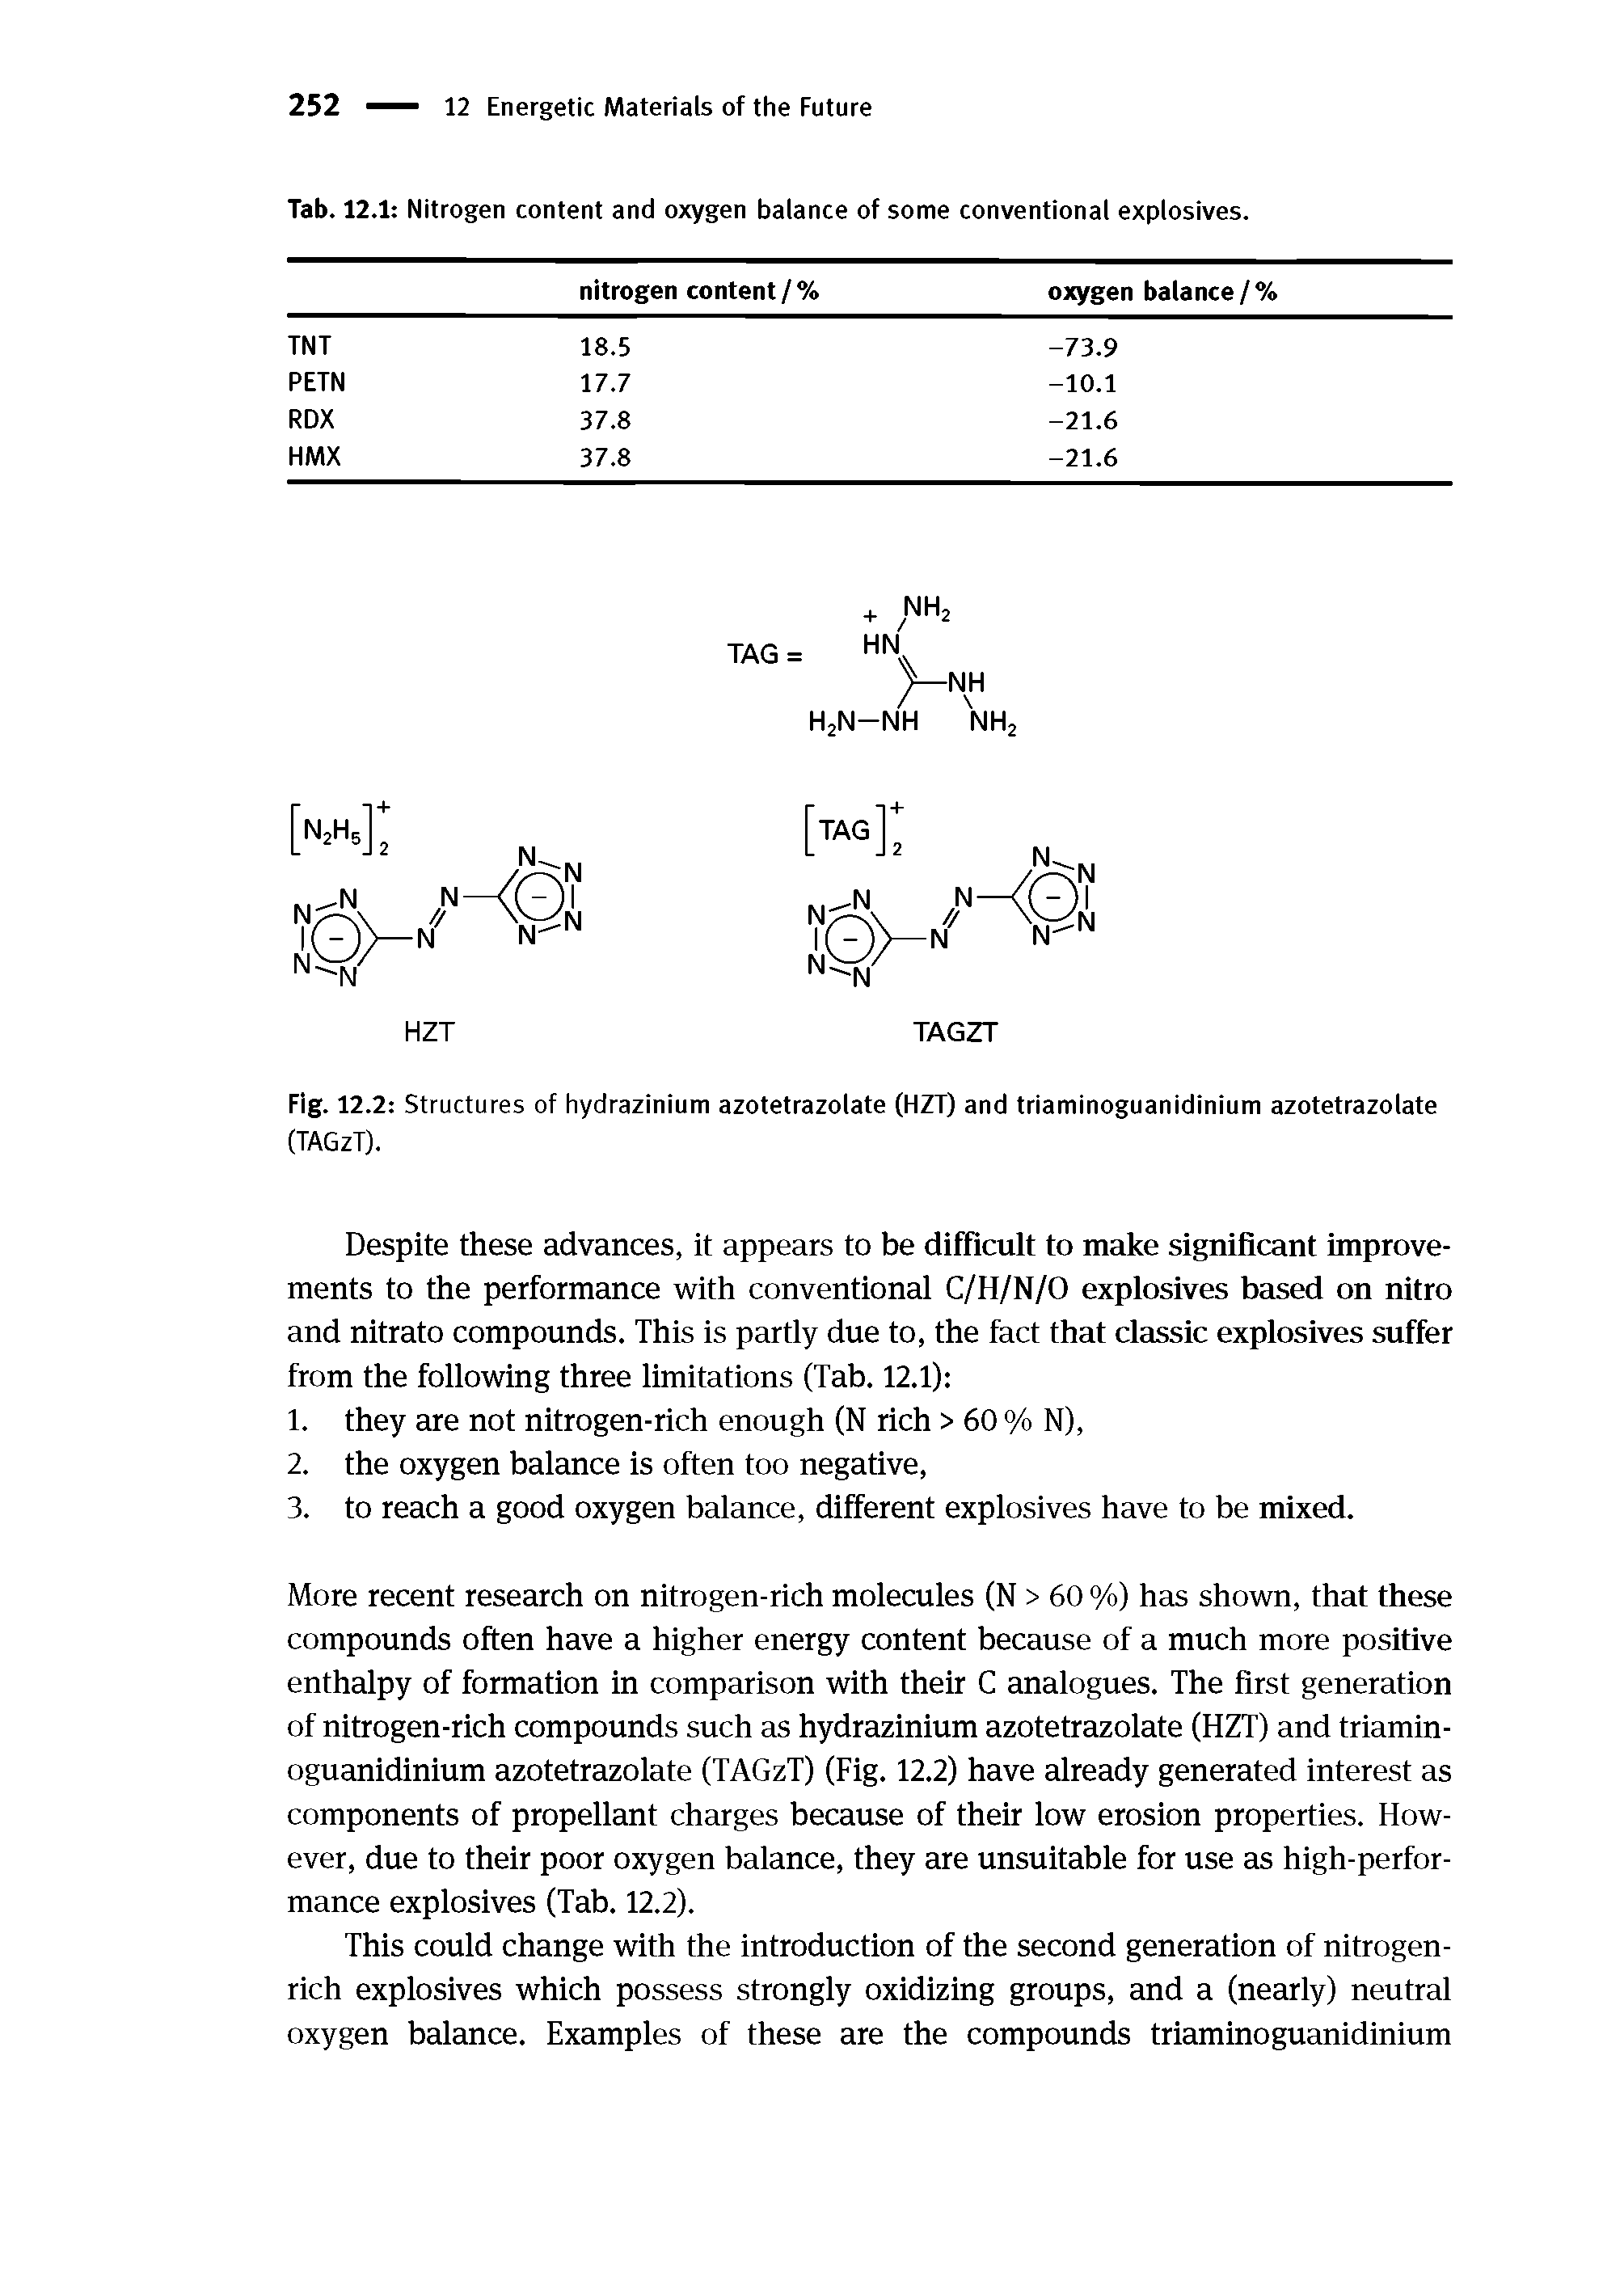 Tab. 12.1 Nitrogen content and oxygen balance of some conventional explosives.